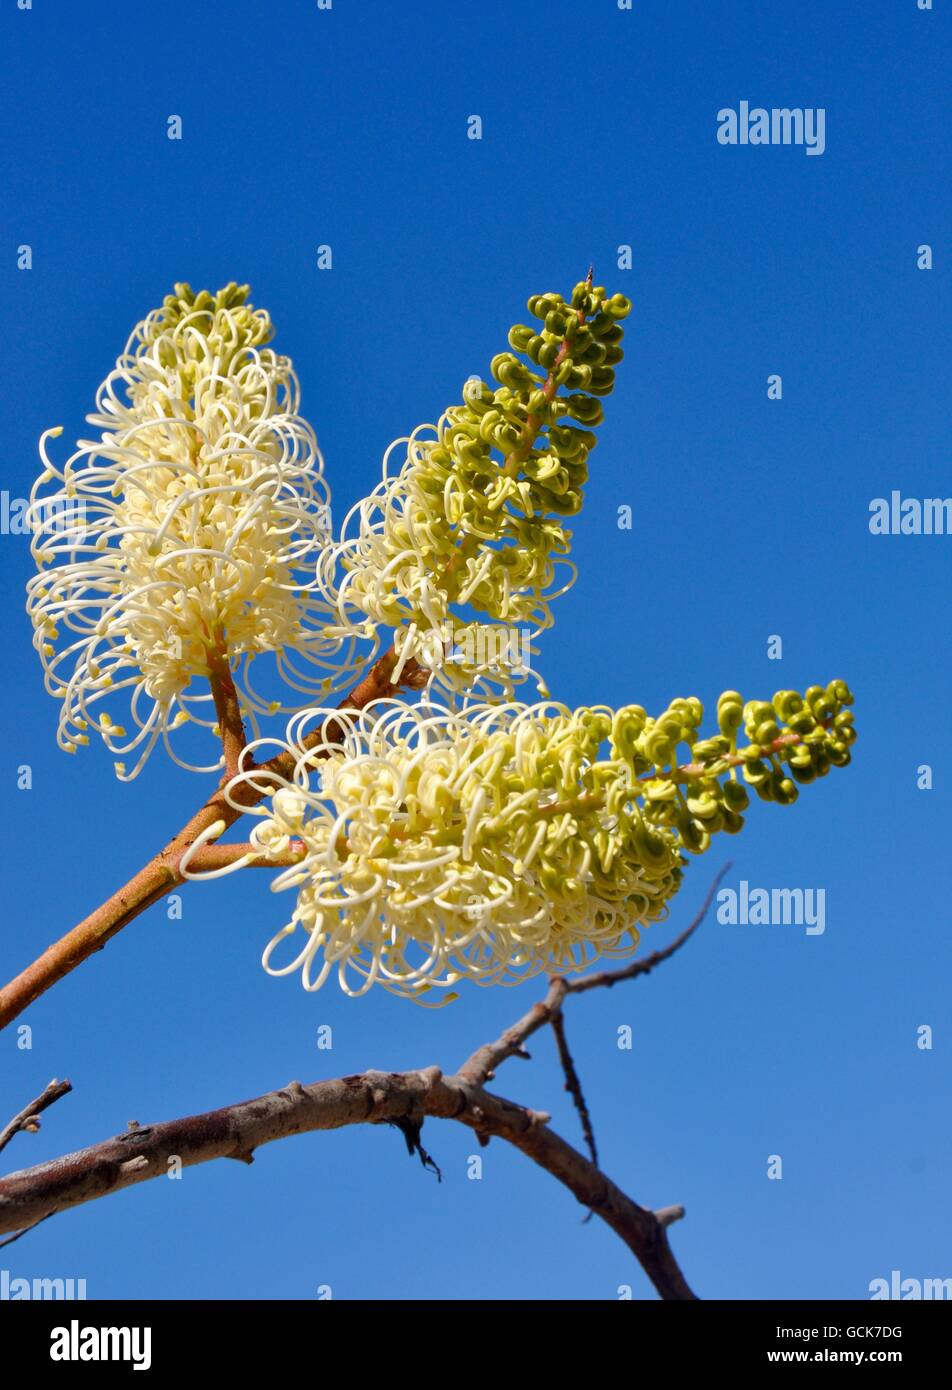 Creamy yellow and white wiry spider flower, Grevillia Moonlight, with a bright blue sky background in Western Australia. Stock Photo